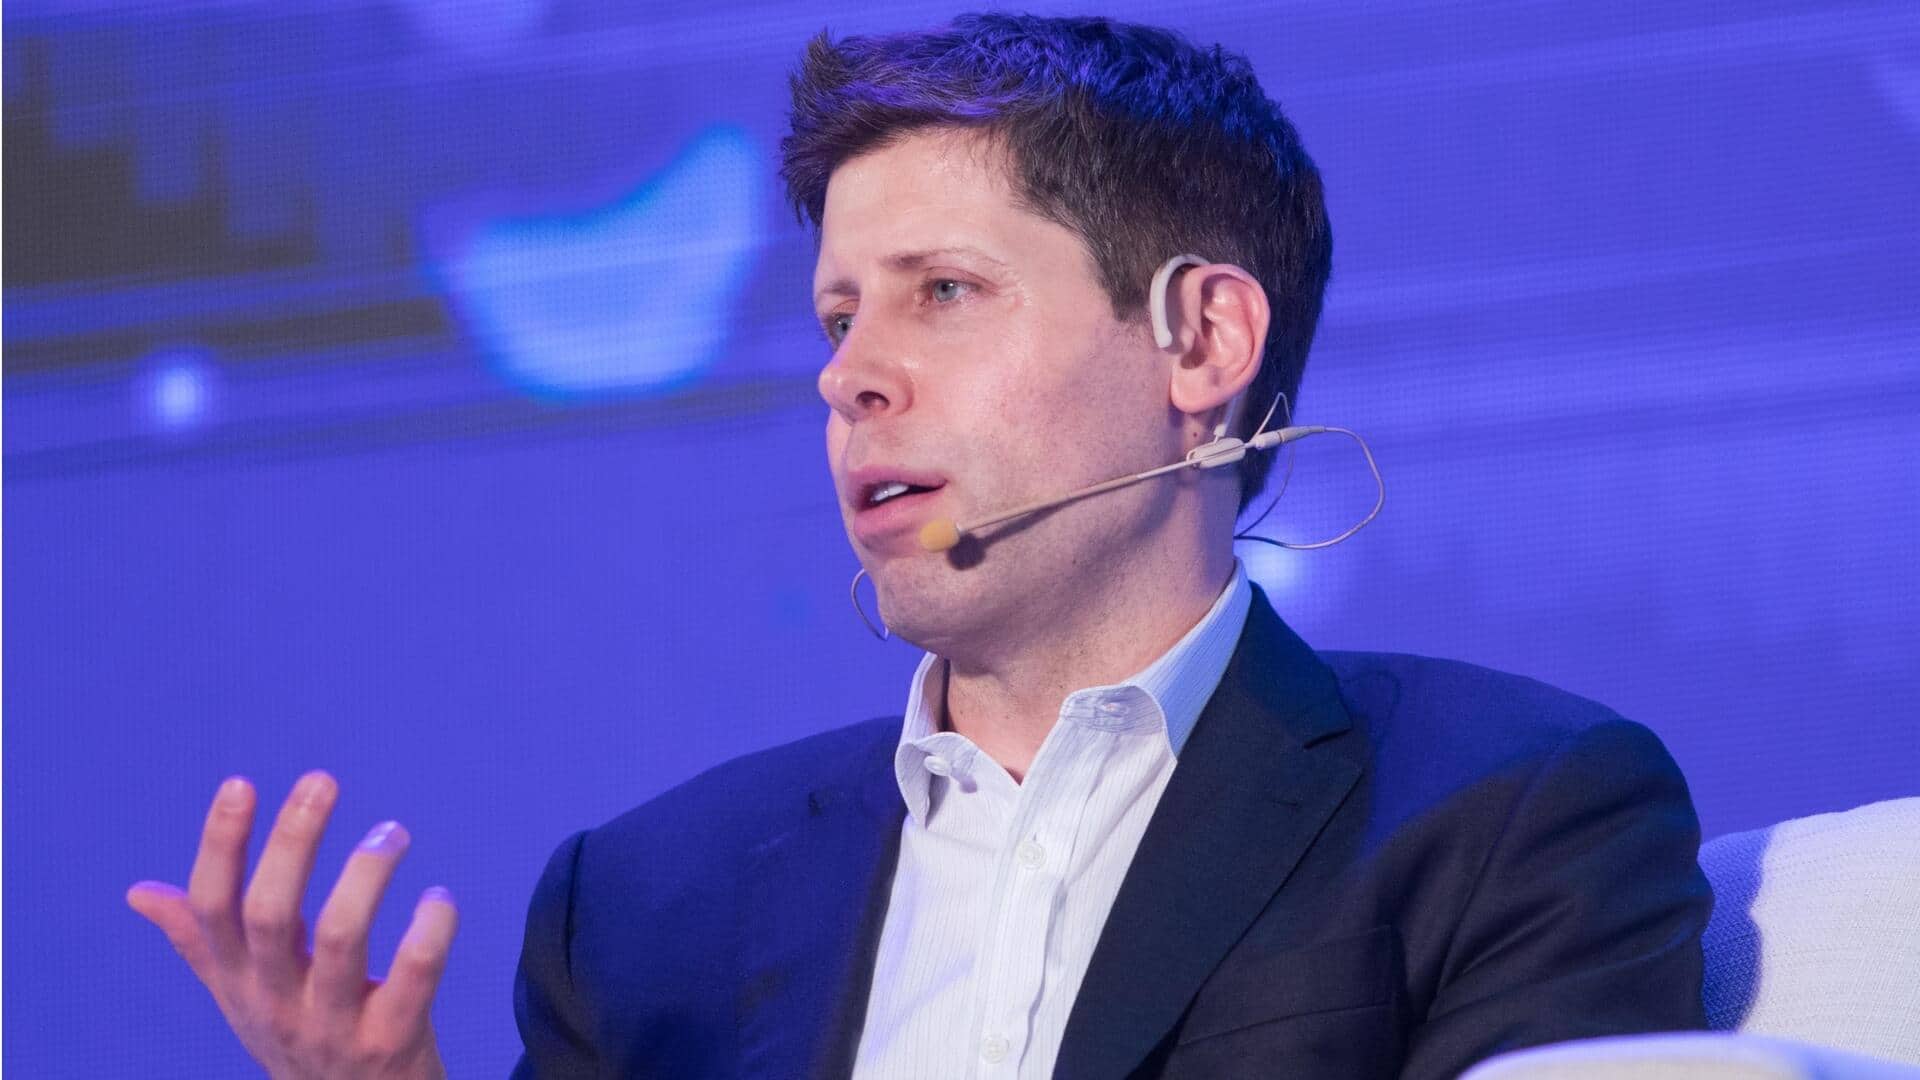 Why OpenAI fired CEO Sam Altman: What we know